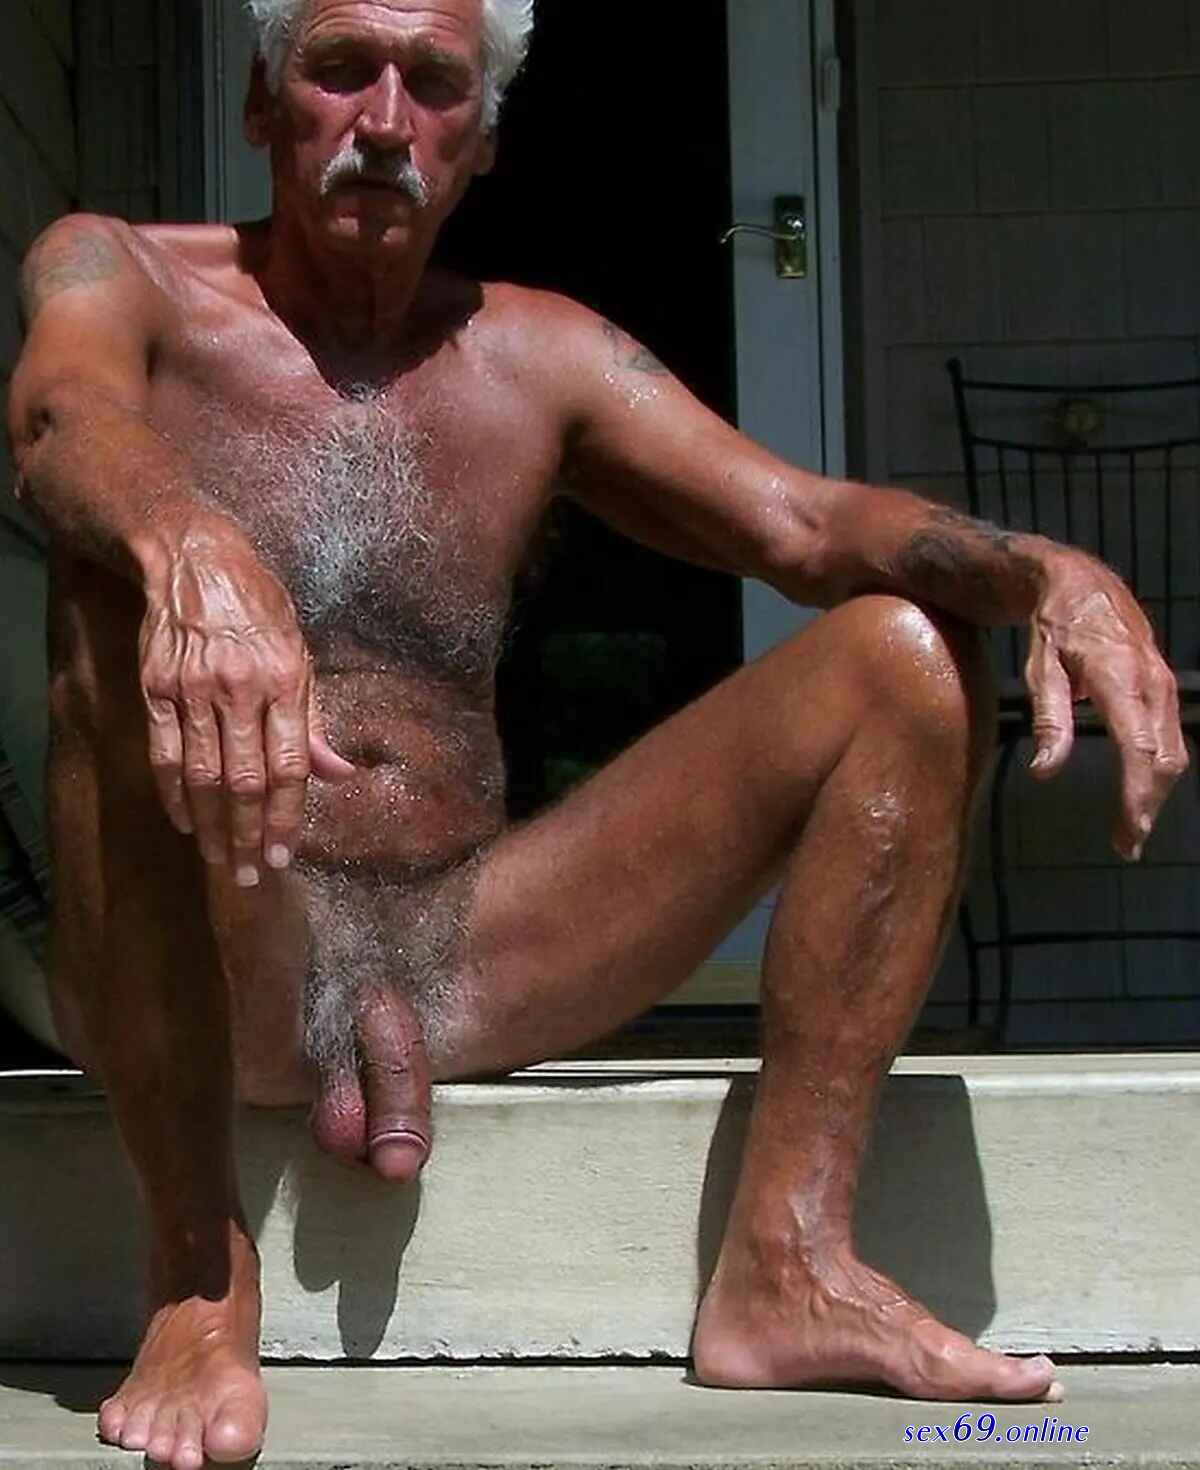 aeronn pogi recommends old man giant cock pic